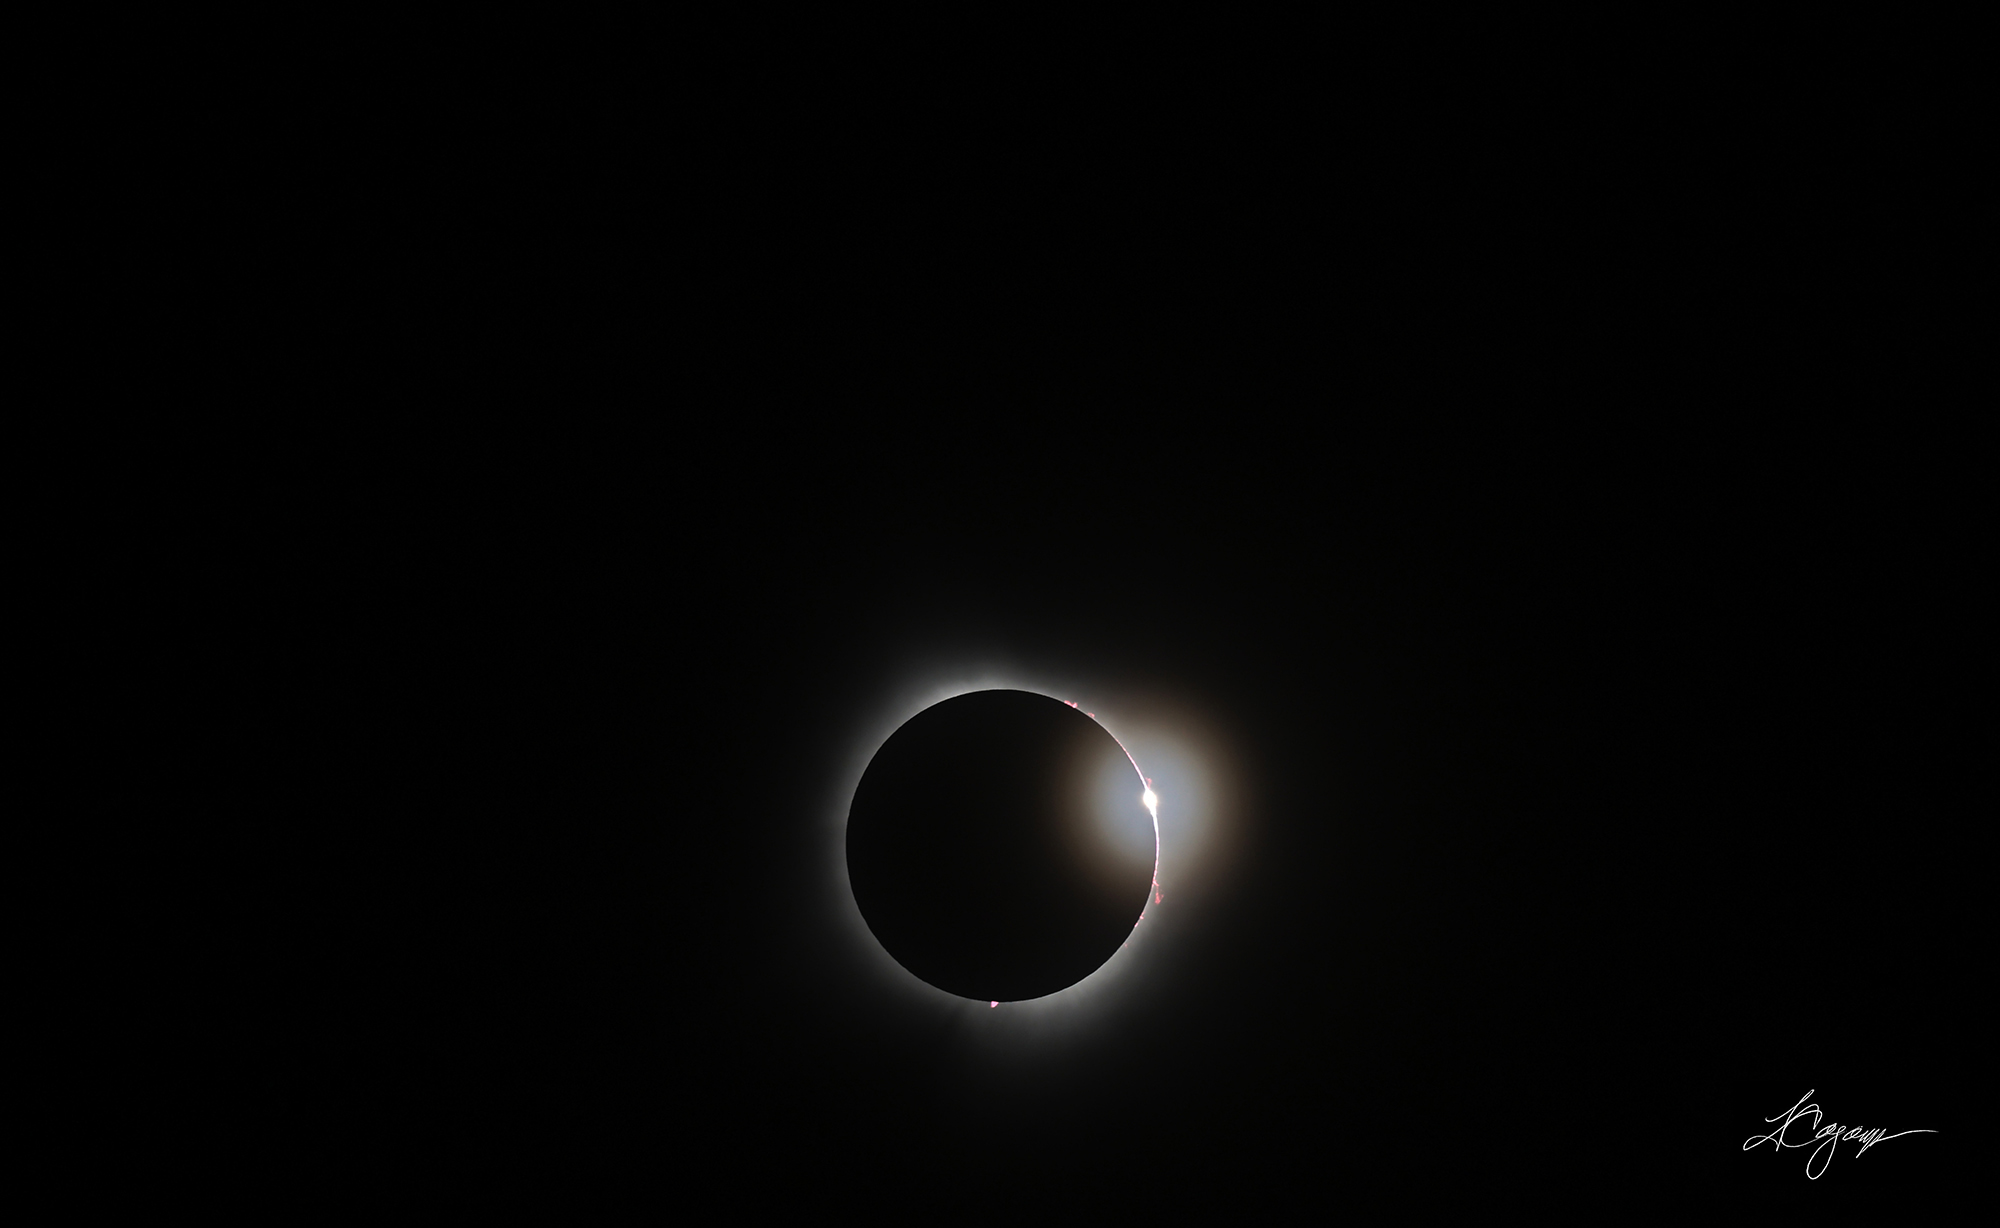 Sun obscured by eclipse